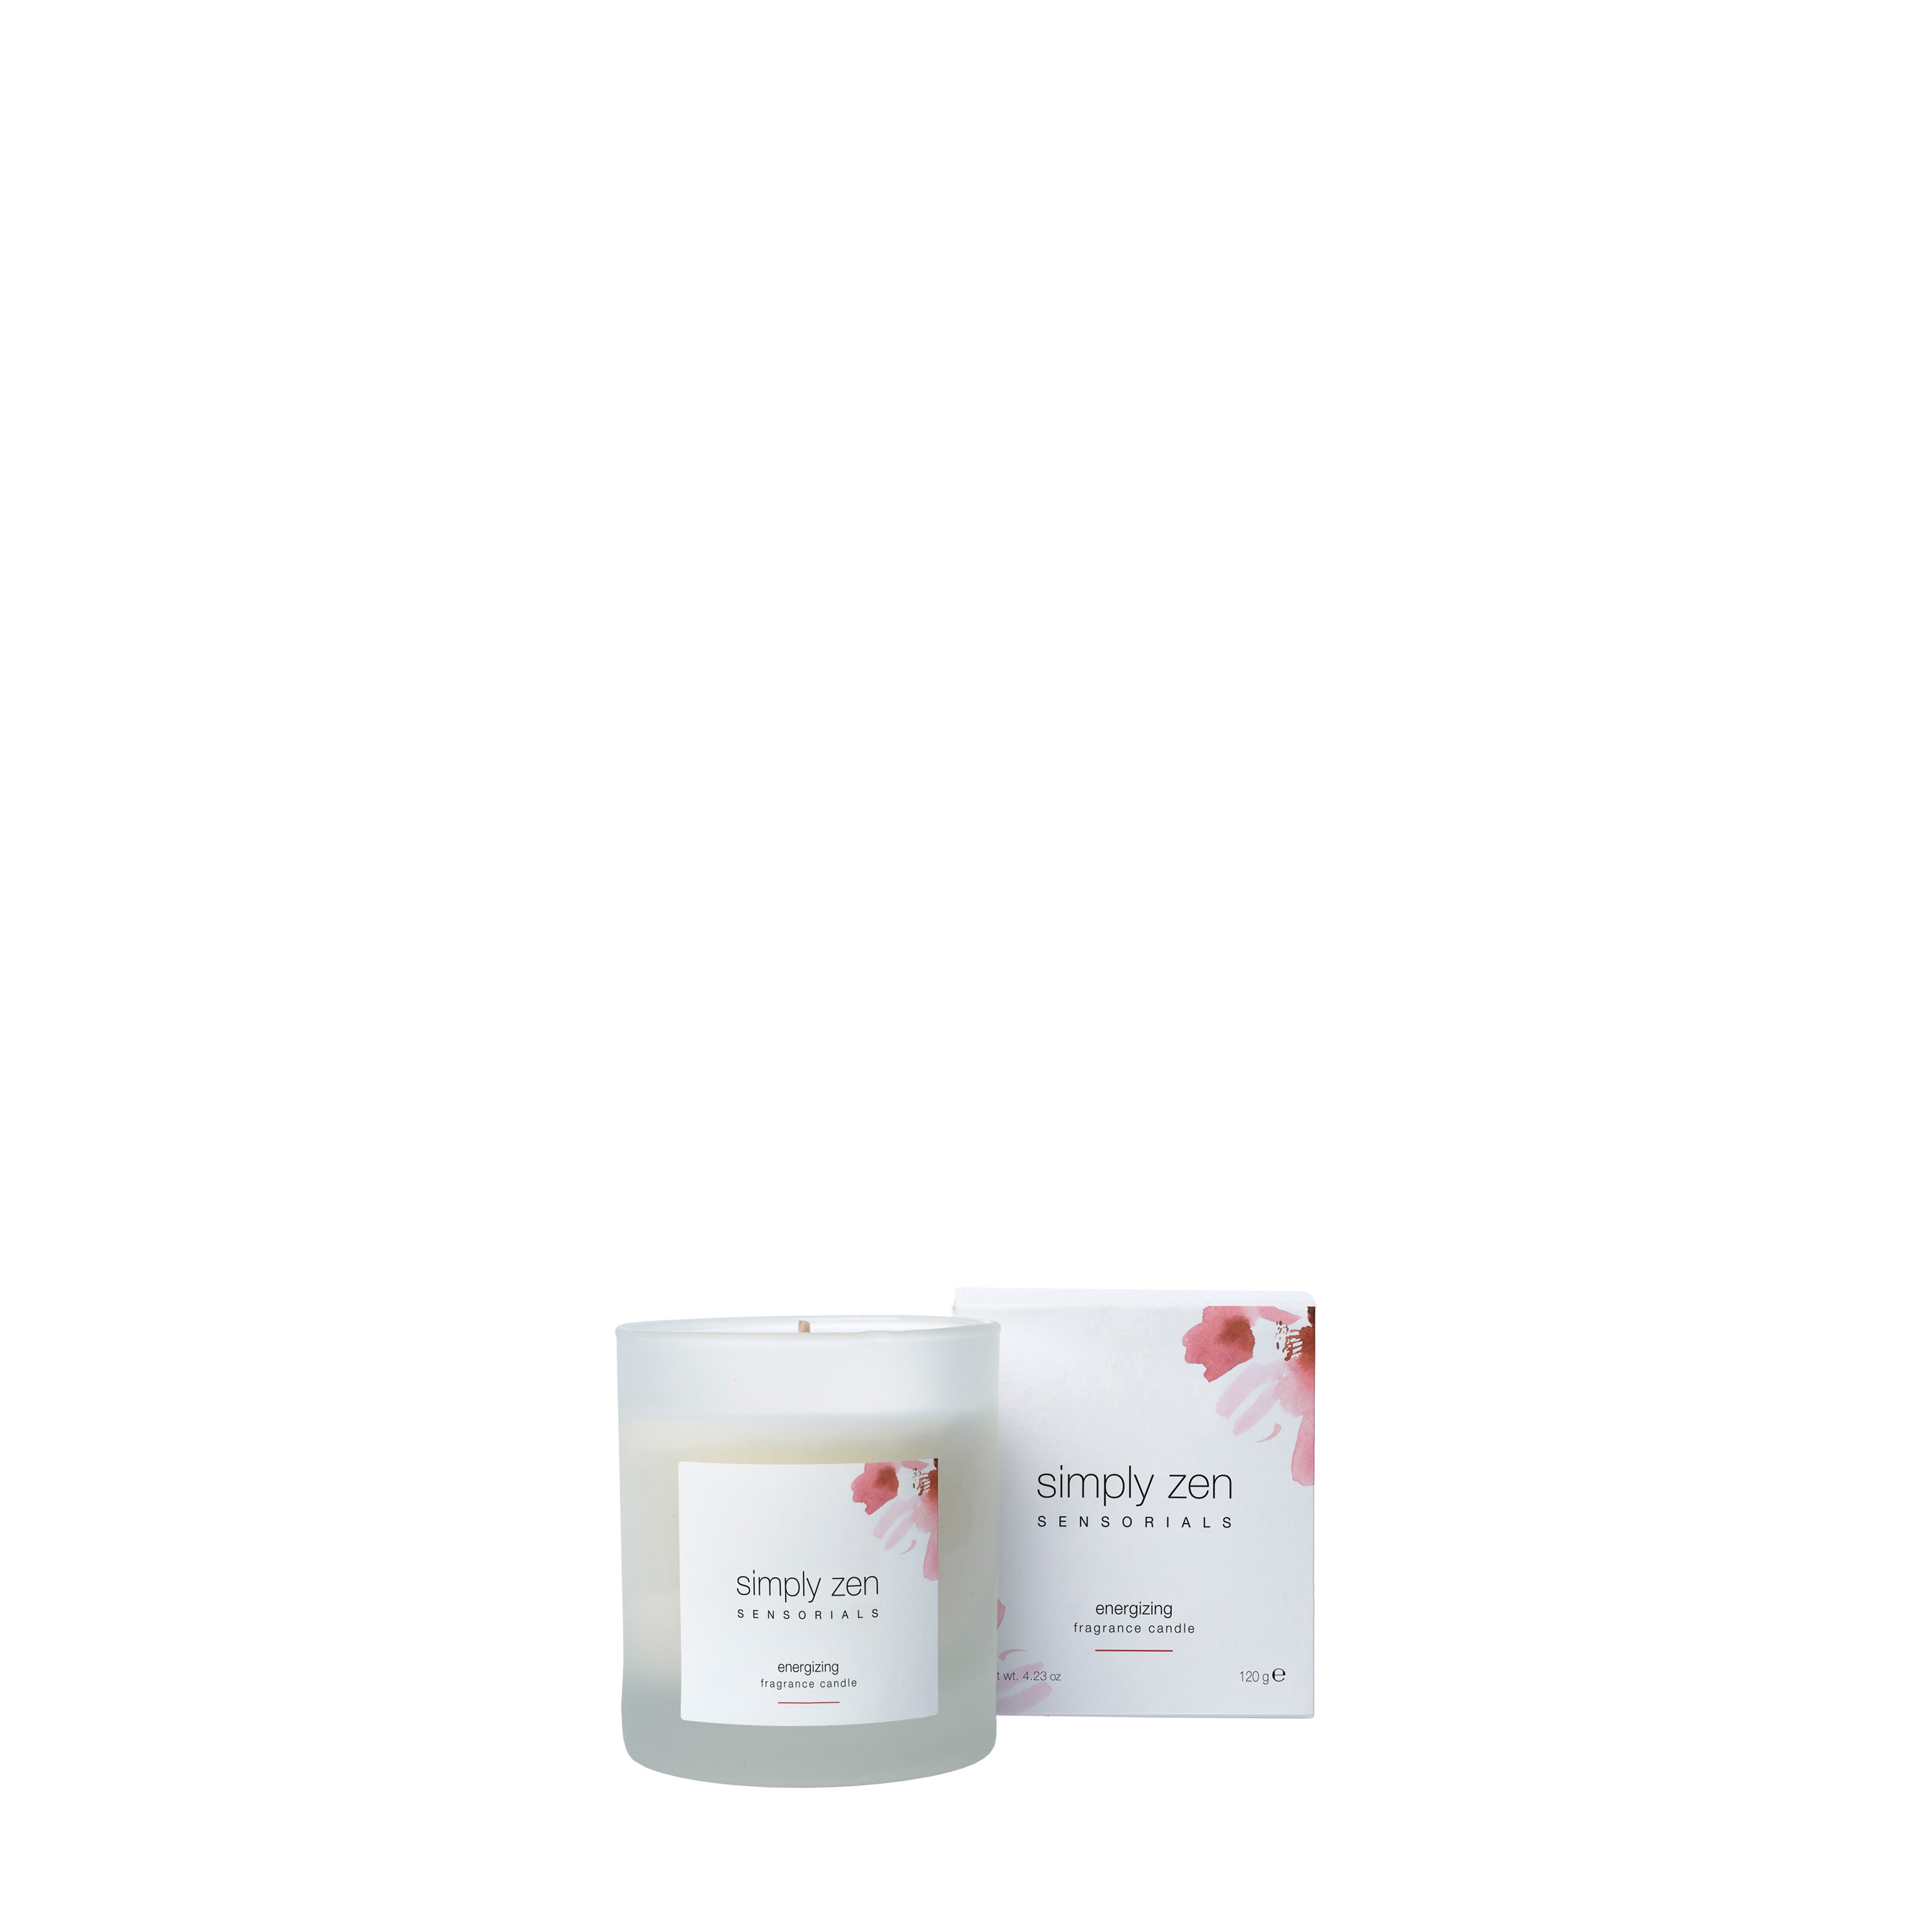 SIMPLY ZEN SENSORIALS ENERGIZING FRAGRANCE CANDLE G